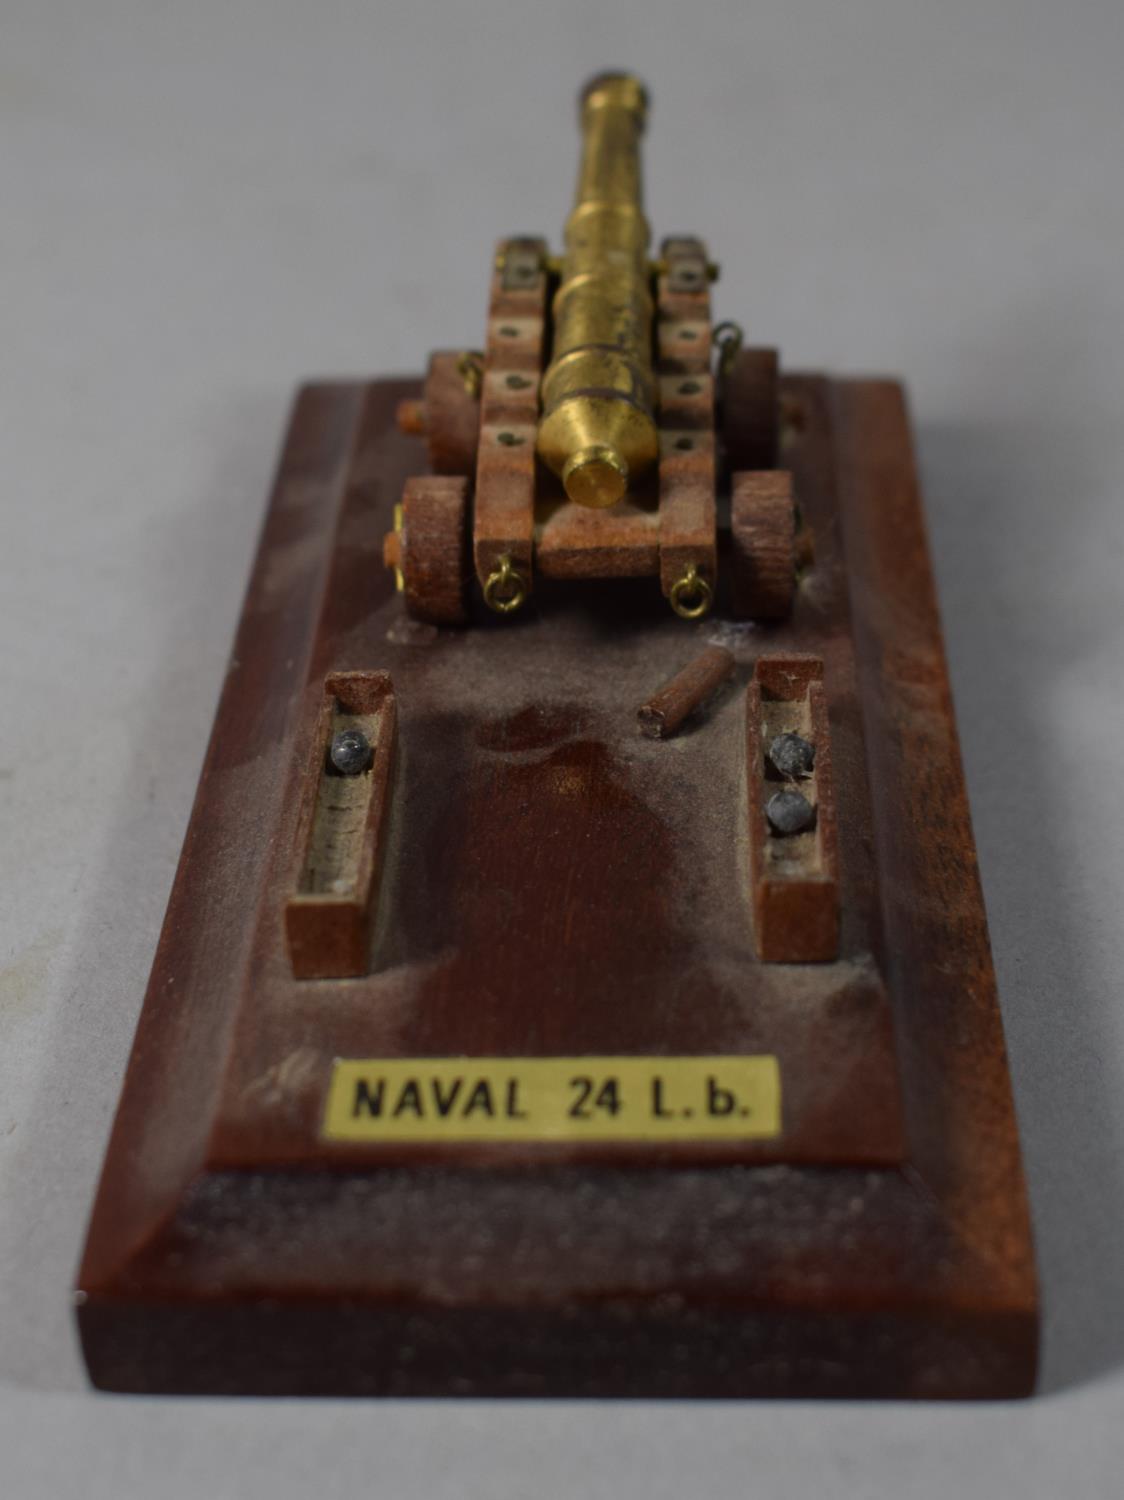 A Small Military Ink Bottle Stand Depicting Naval 24lb Cannon, Missing Ink Bottle, 13cm Long - Image 2 of 4